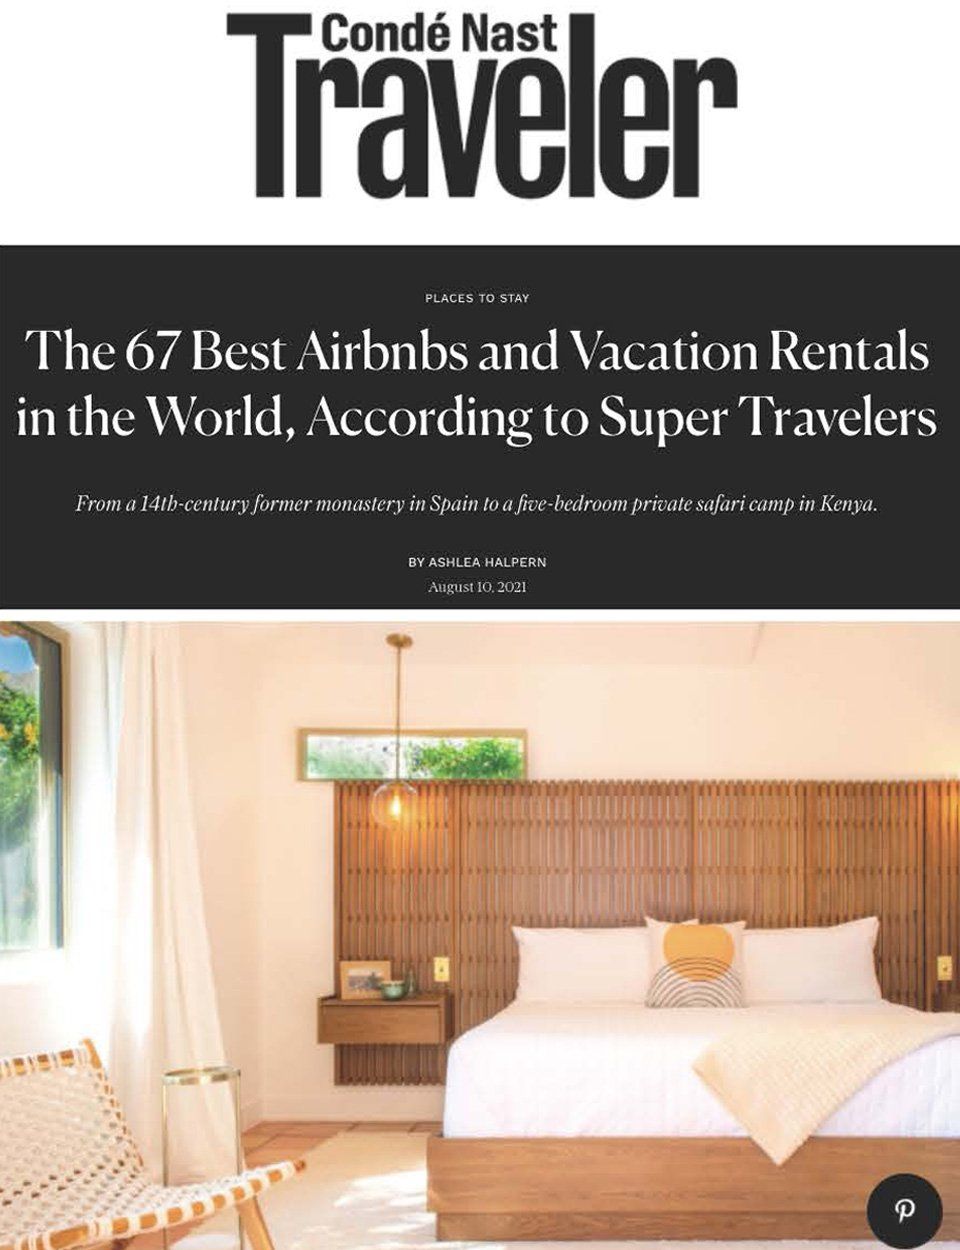 the cover of condé nast traveler magazine shows a bedroom with a bed and a chair